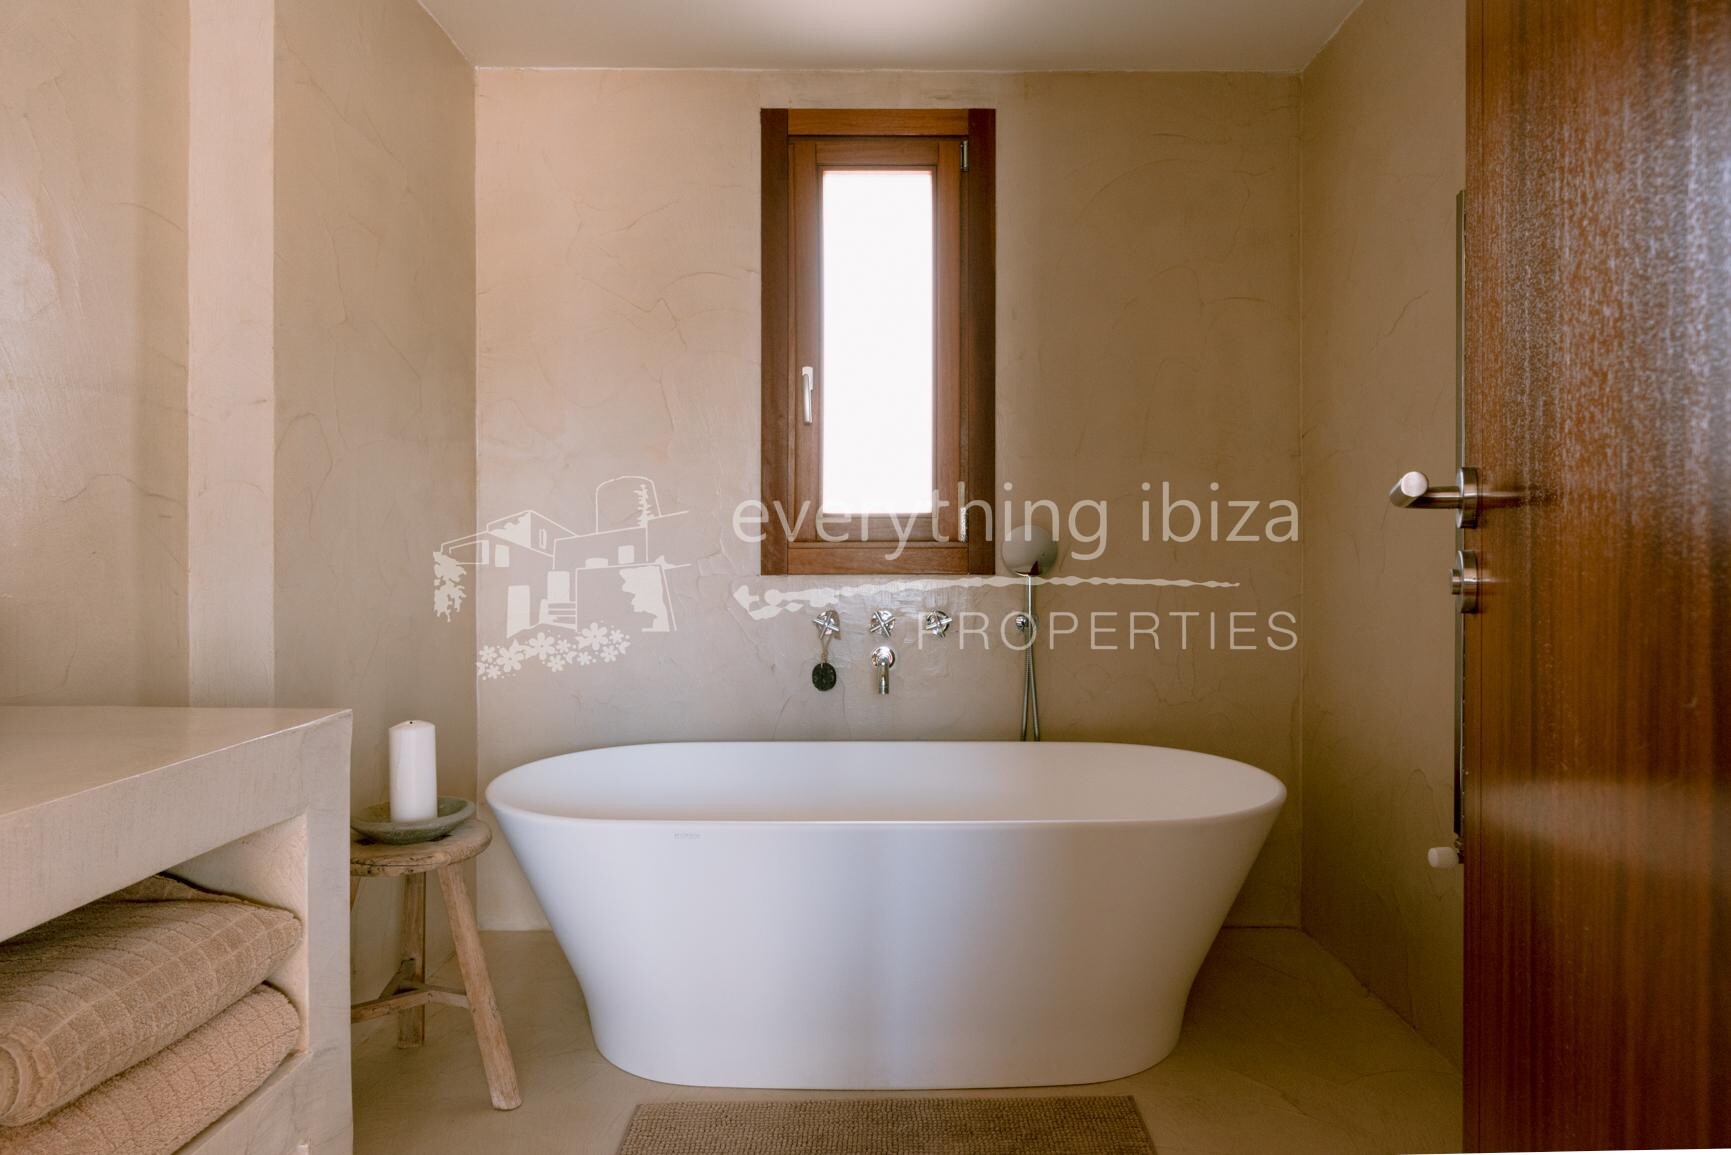 Modern Four Bedroom Townhouse in San Jose Village, ref. 1648, for sale in Ibiza by everything ibiza Properties